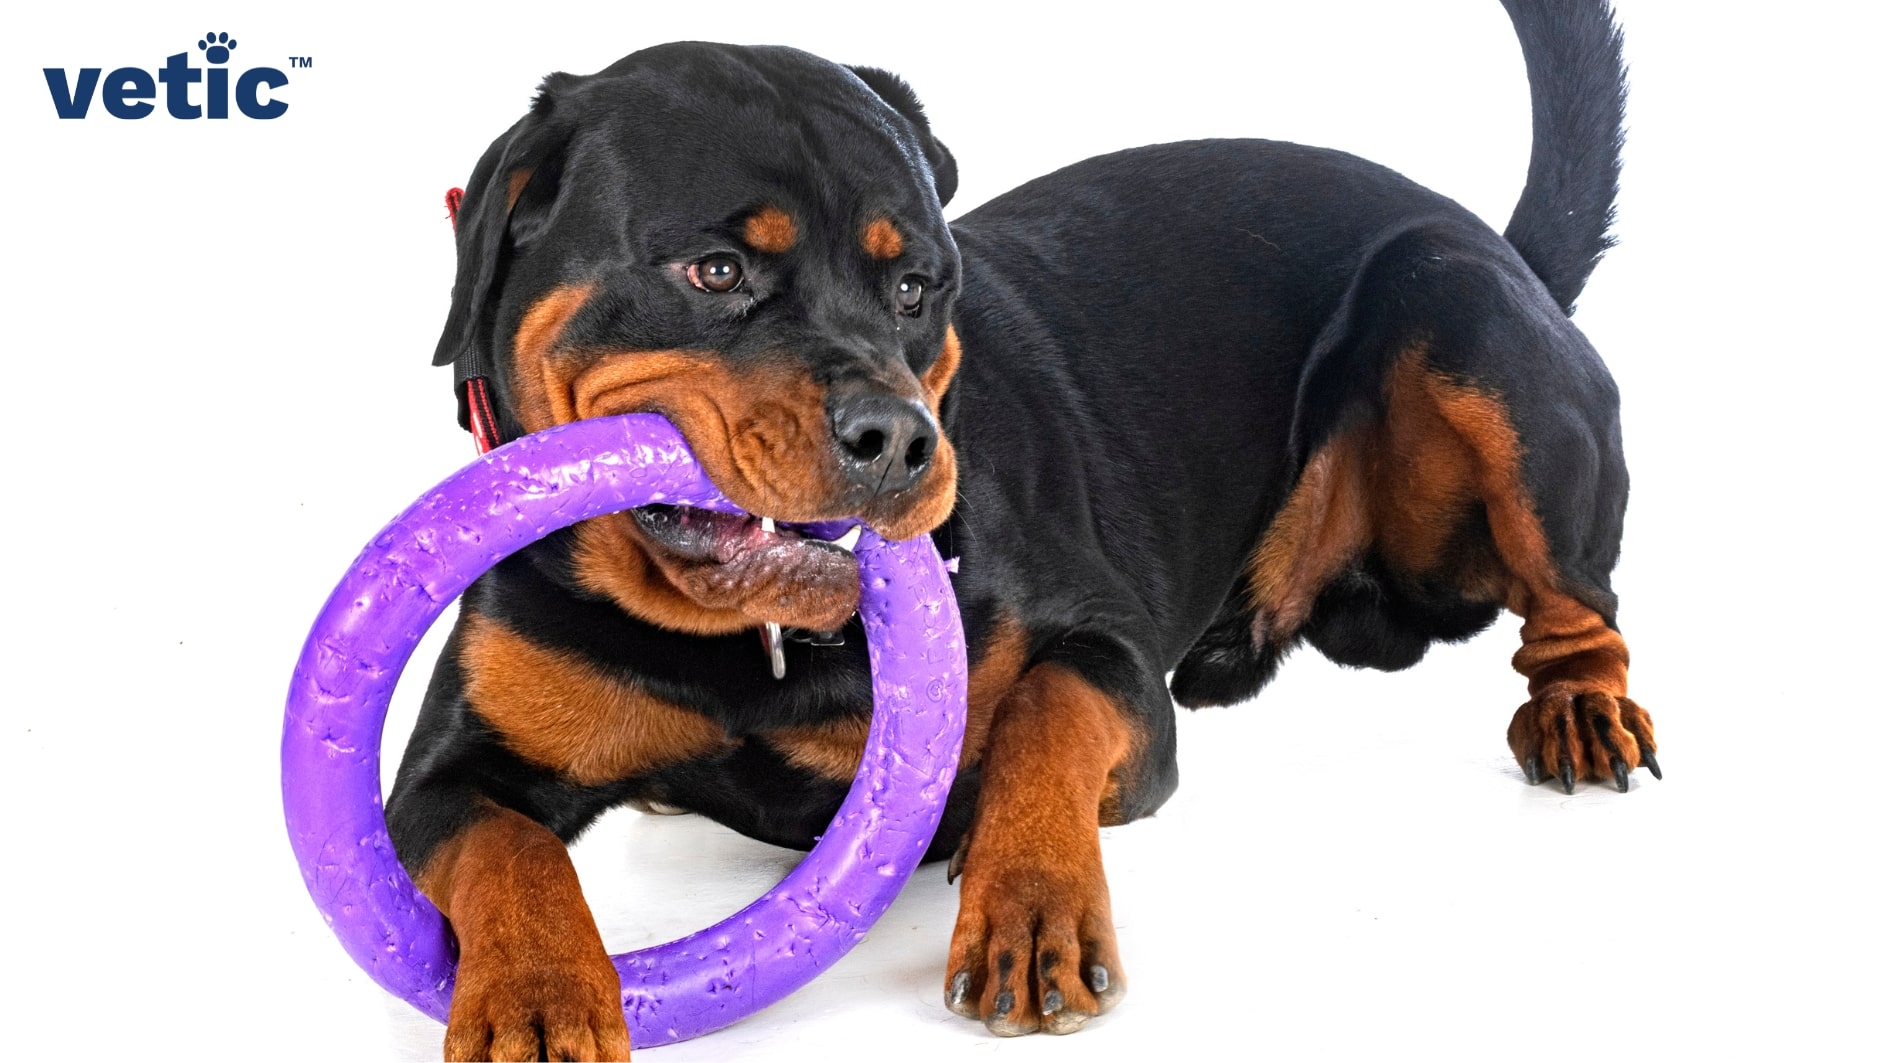 Junior rottweiler squatting while playing with a large sized purple chew toy. The chewtoy is well-used. The young rottie has the Rottweiler Breed standard markings and colors. His paws and parts of his legs, muzzle and lower abdomen are tan. Head, neck and back are black.